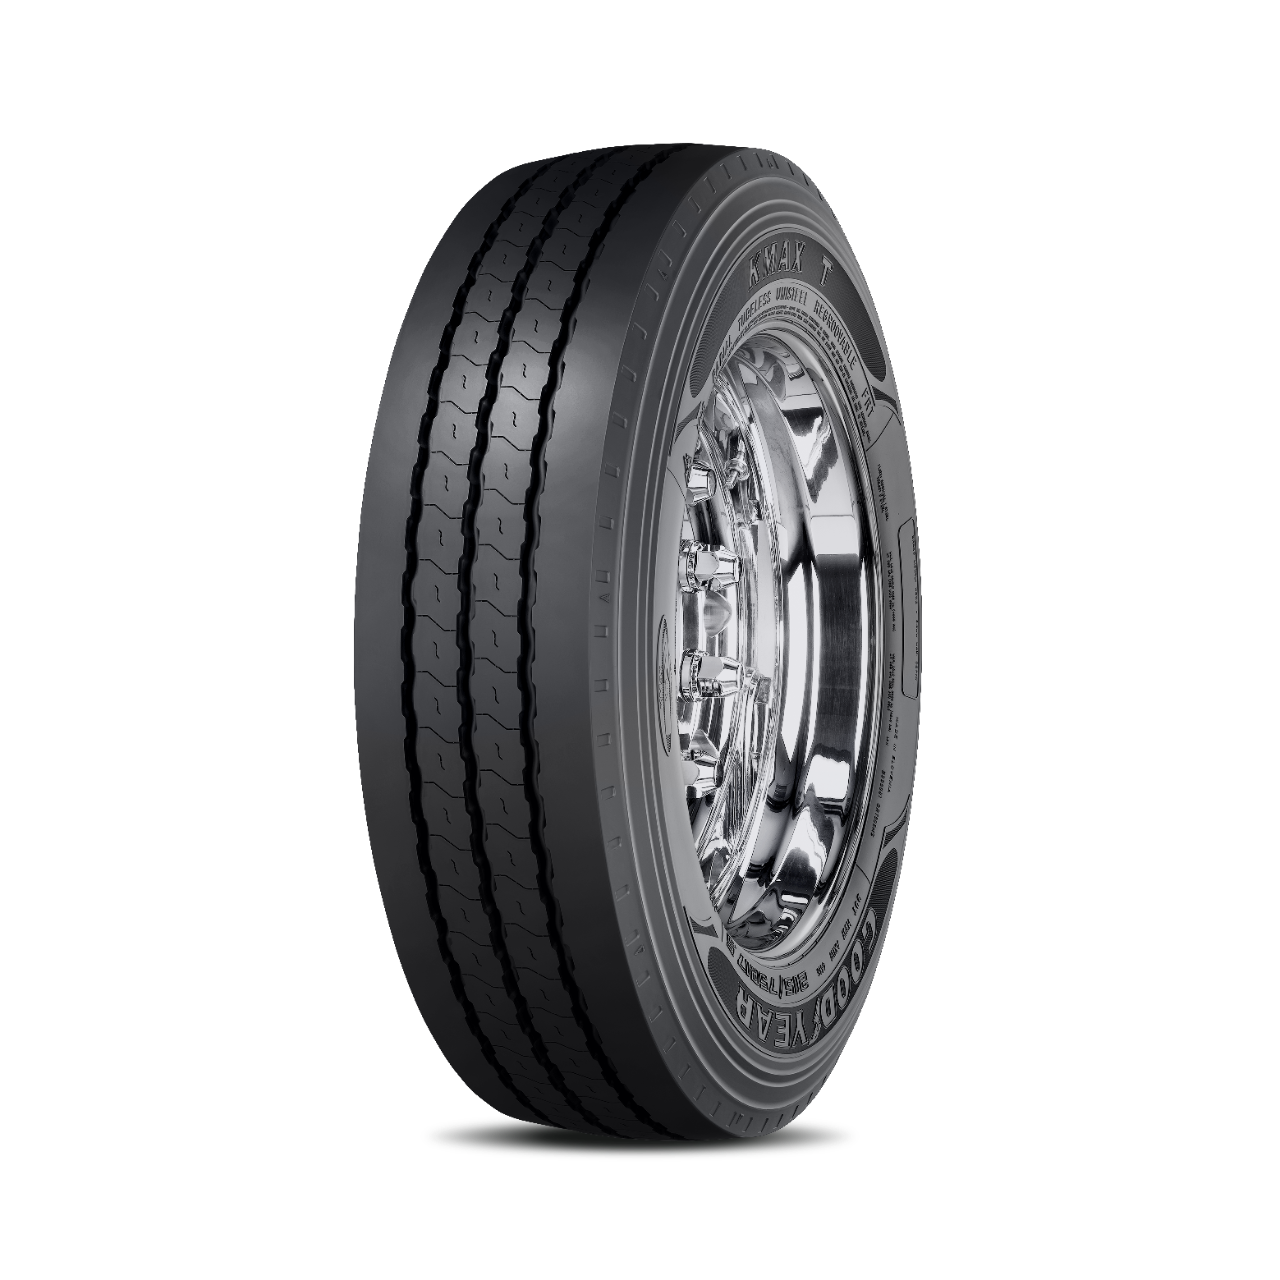 Goodyear, KMAX T 3PMSF Sommer GY20565175JKMAXT